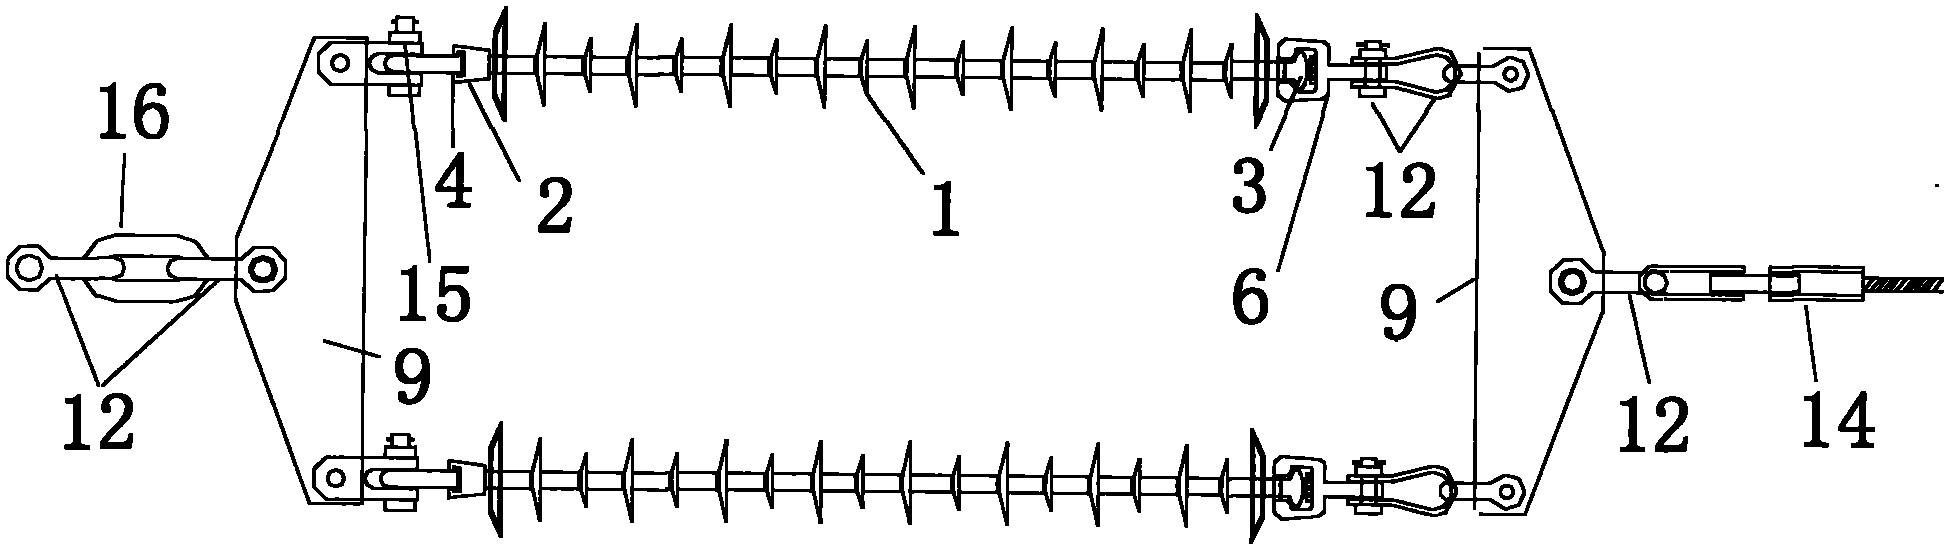 A composite insulator tension string for overhead transmission lines